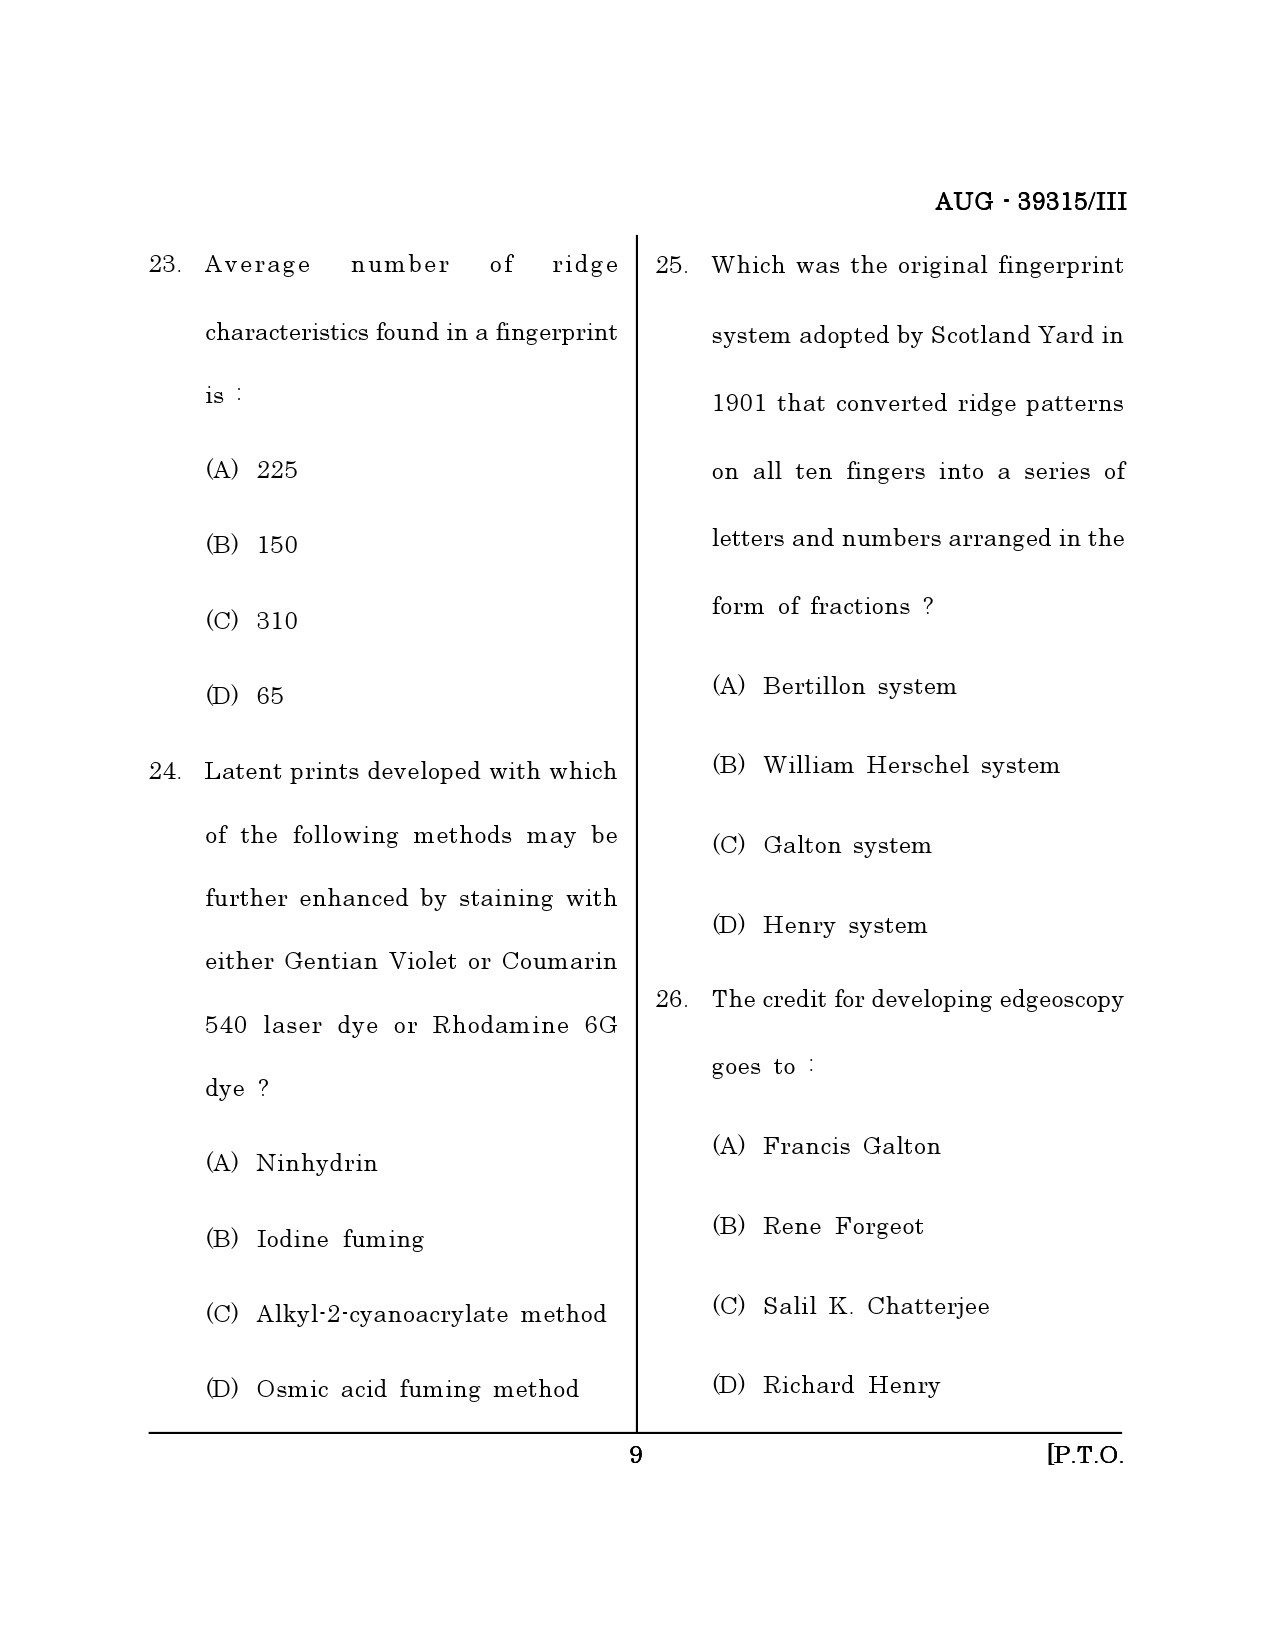 Maharashtra SET Forensic Science Question Paper III August 2015 8